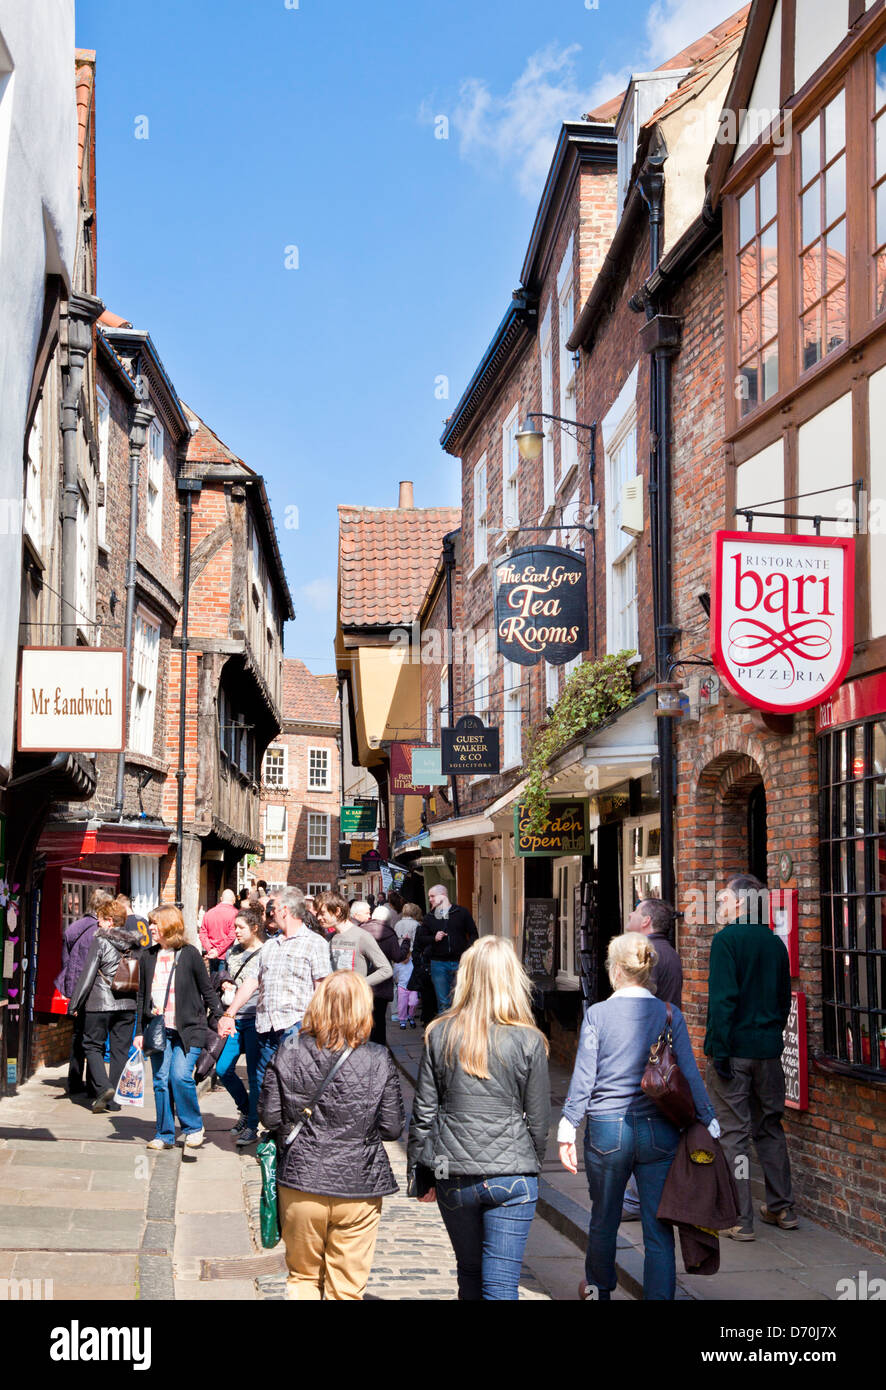 The Shambles, the narrow street of half-timbered old medieval buildings, York, North Yorkshire England, UK, GB, EU, Europe Stock Photo